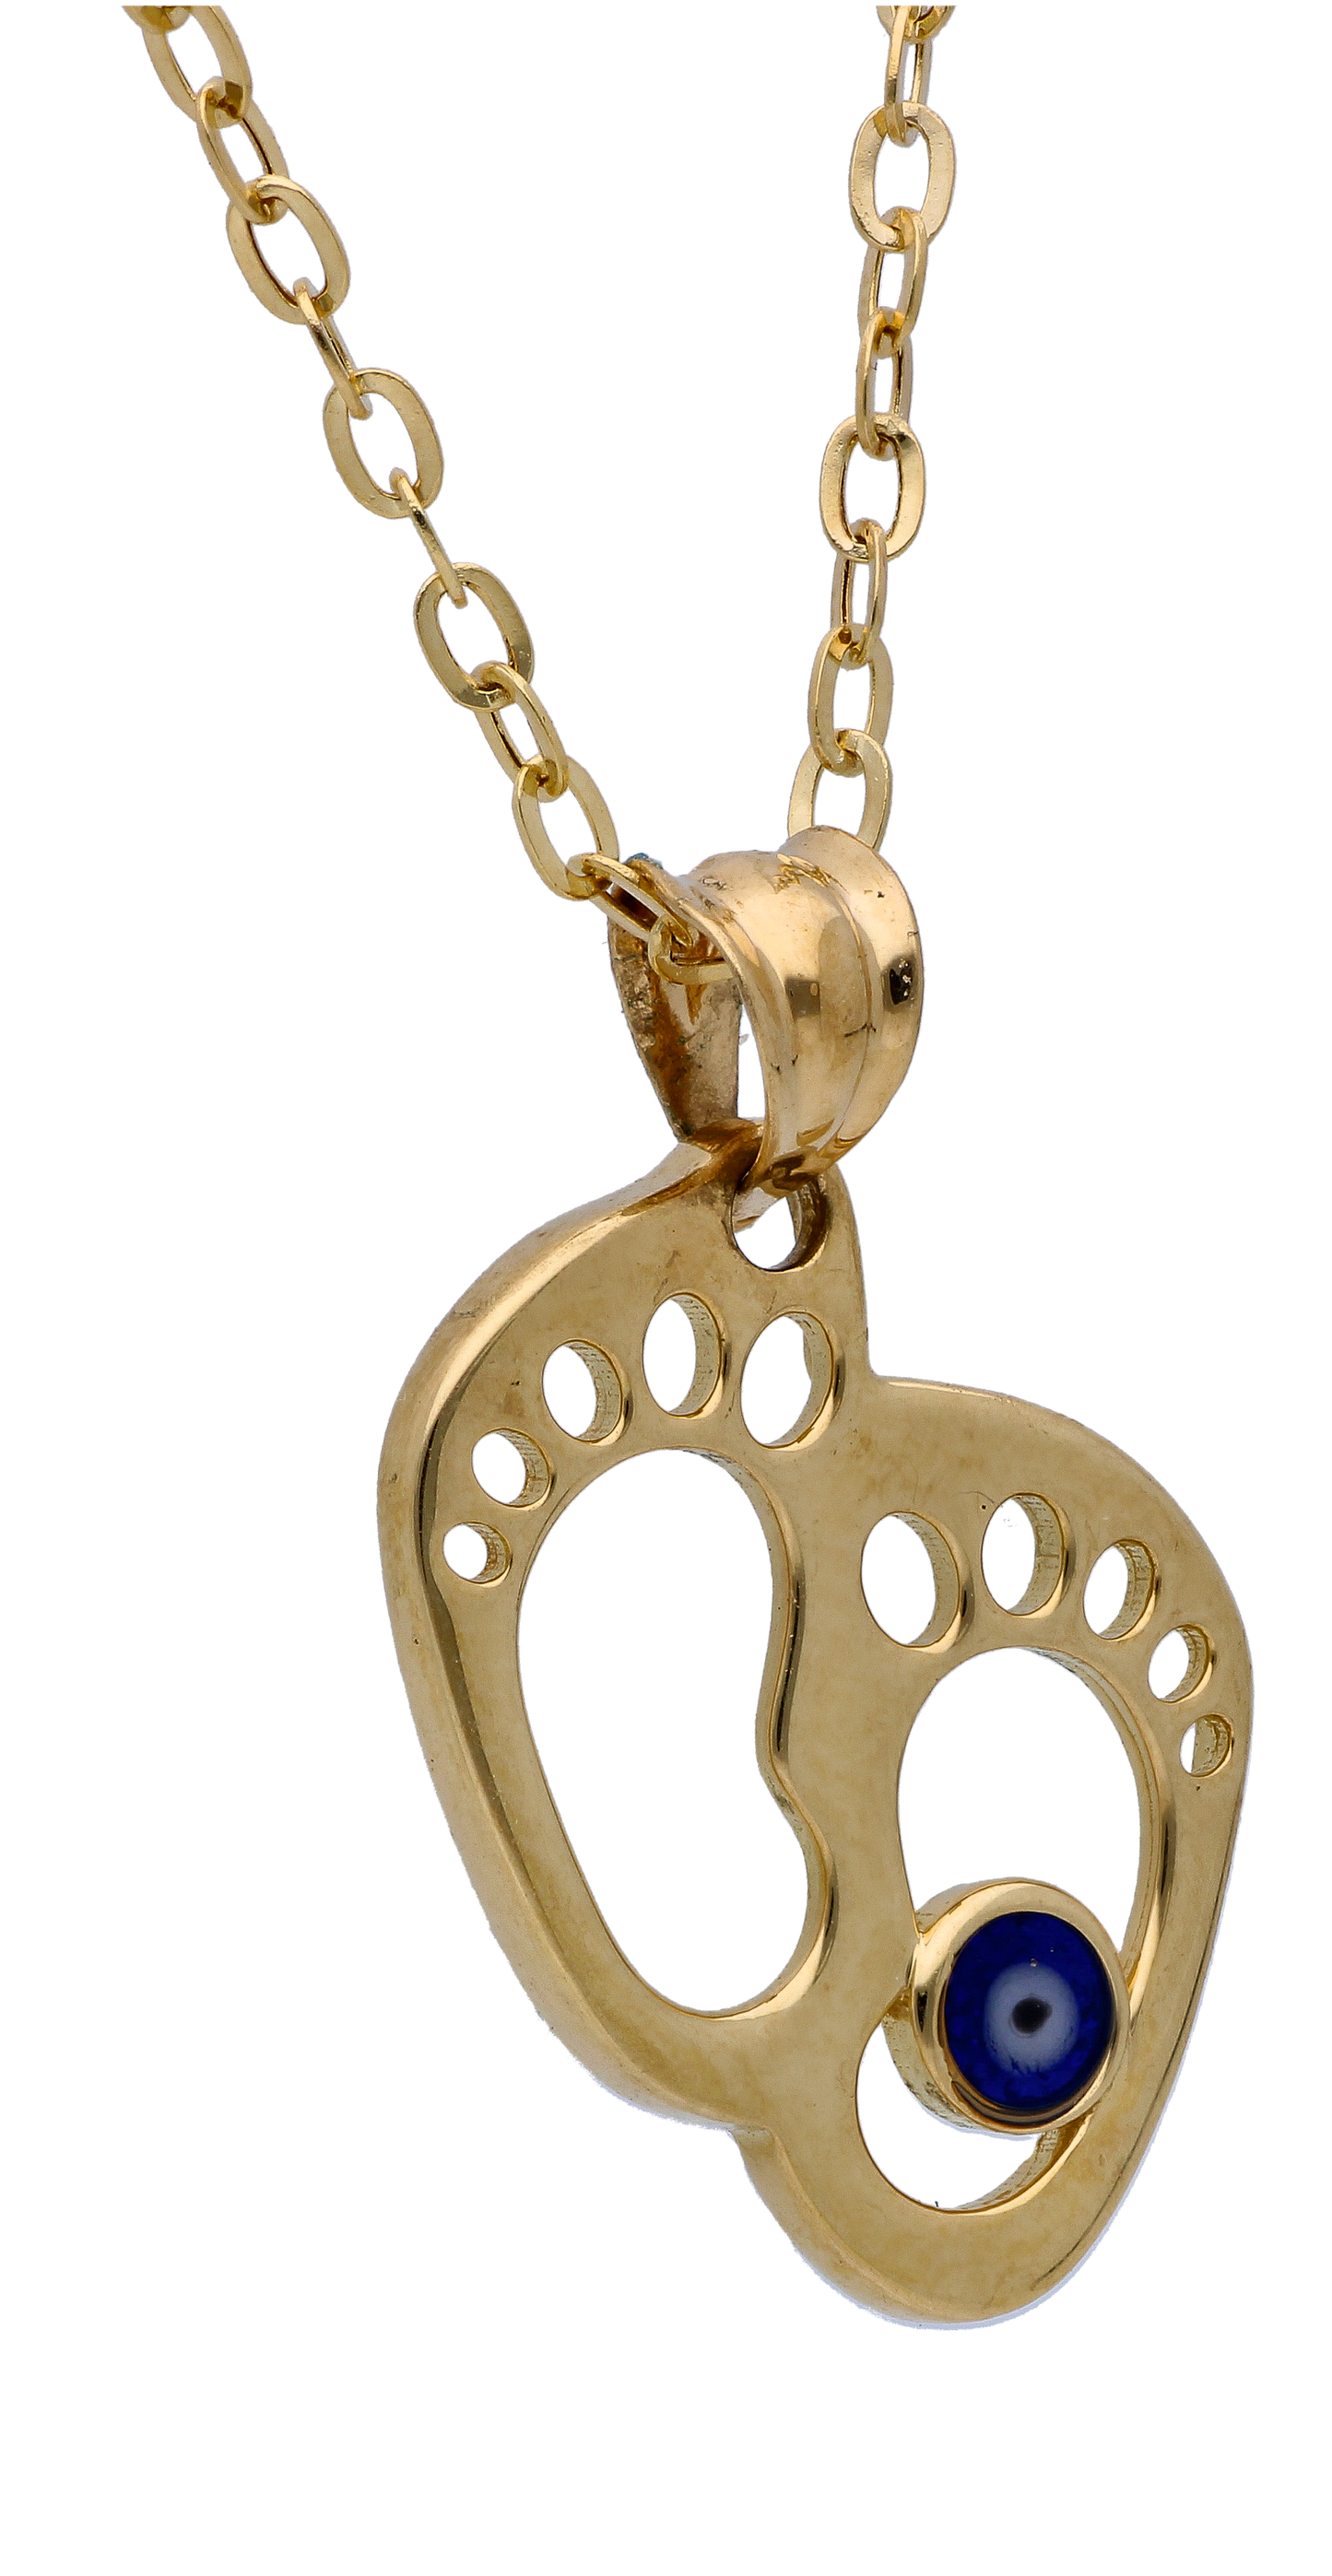 Gold Necklace (Chain with Hollow Foot with Evil Eye Pendant) 18KT - FKJNKL18KU6288